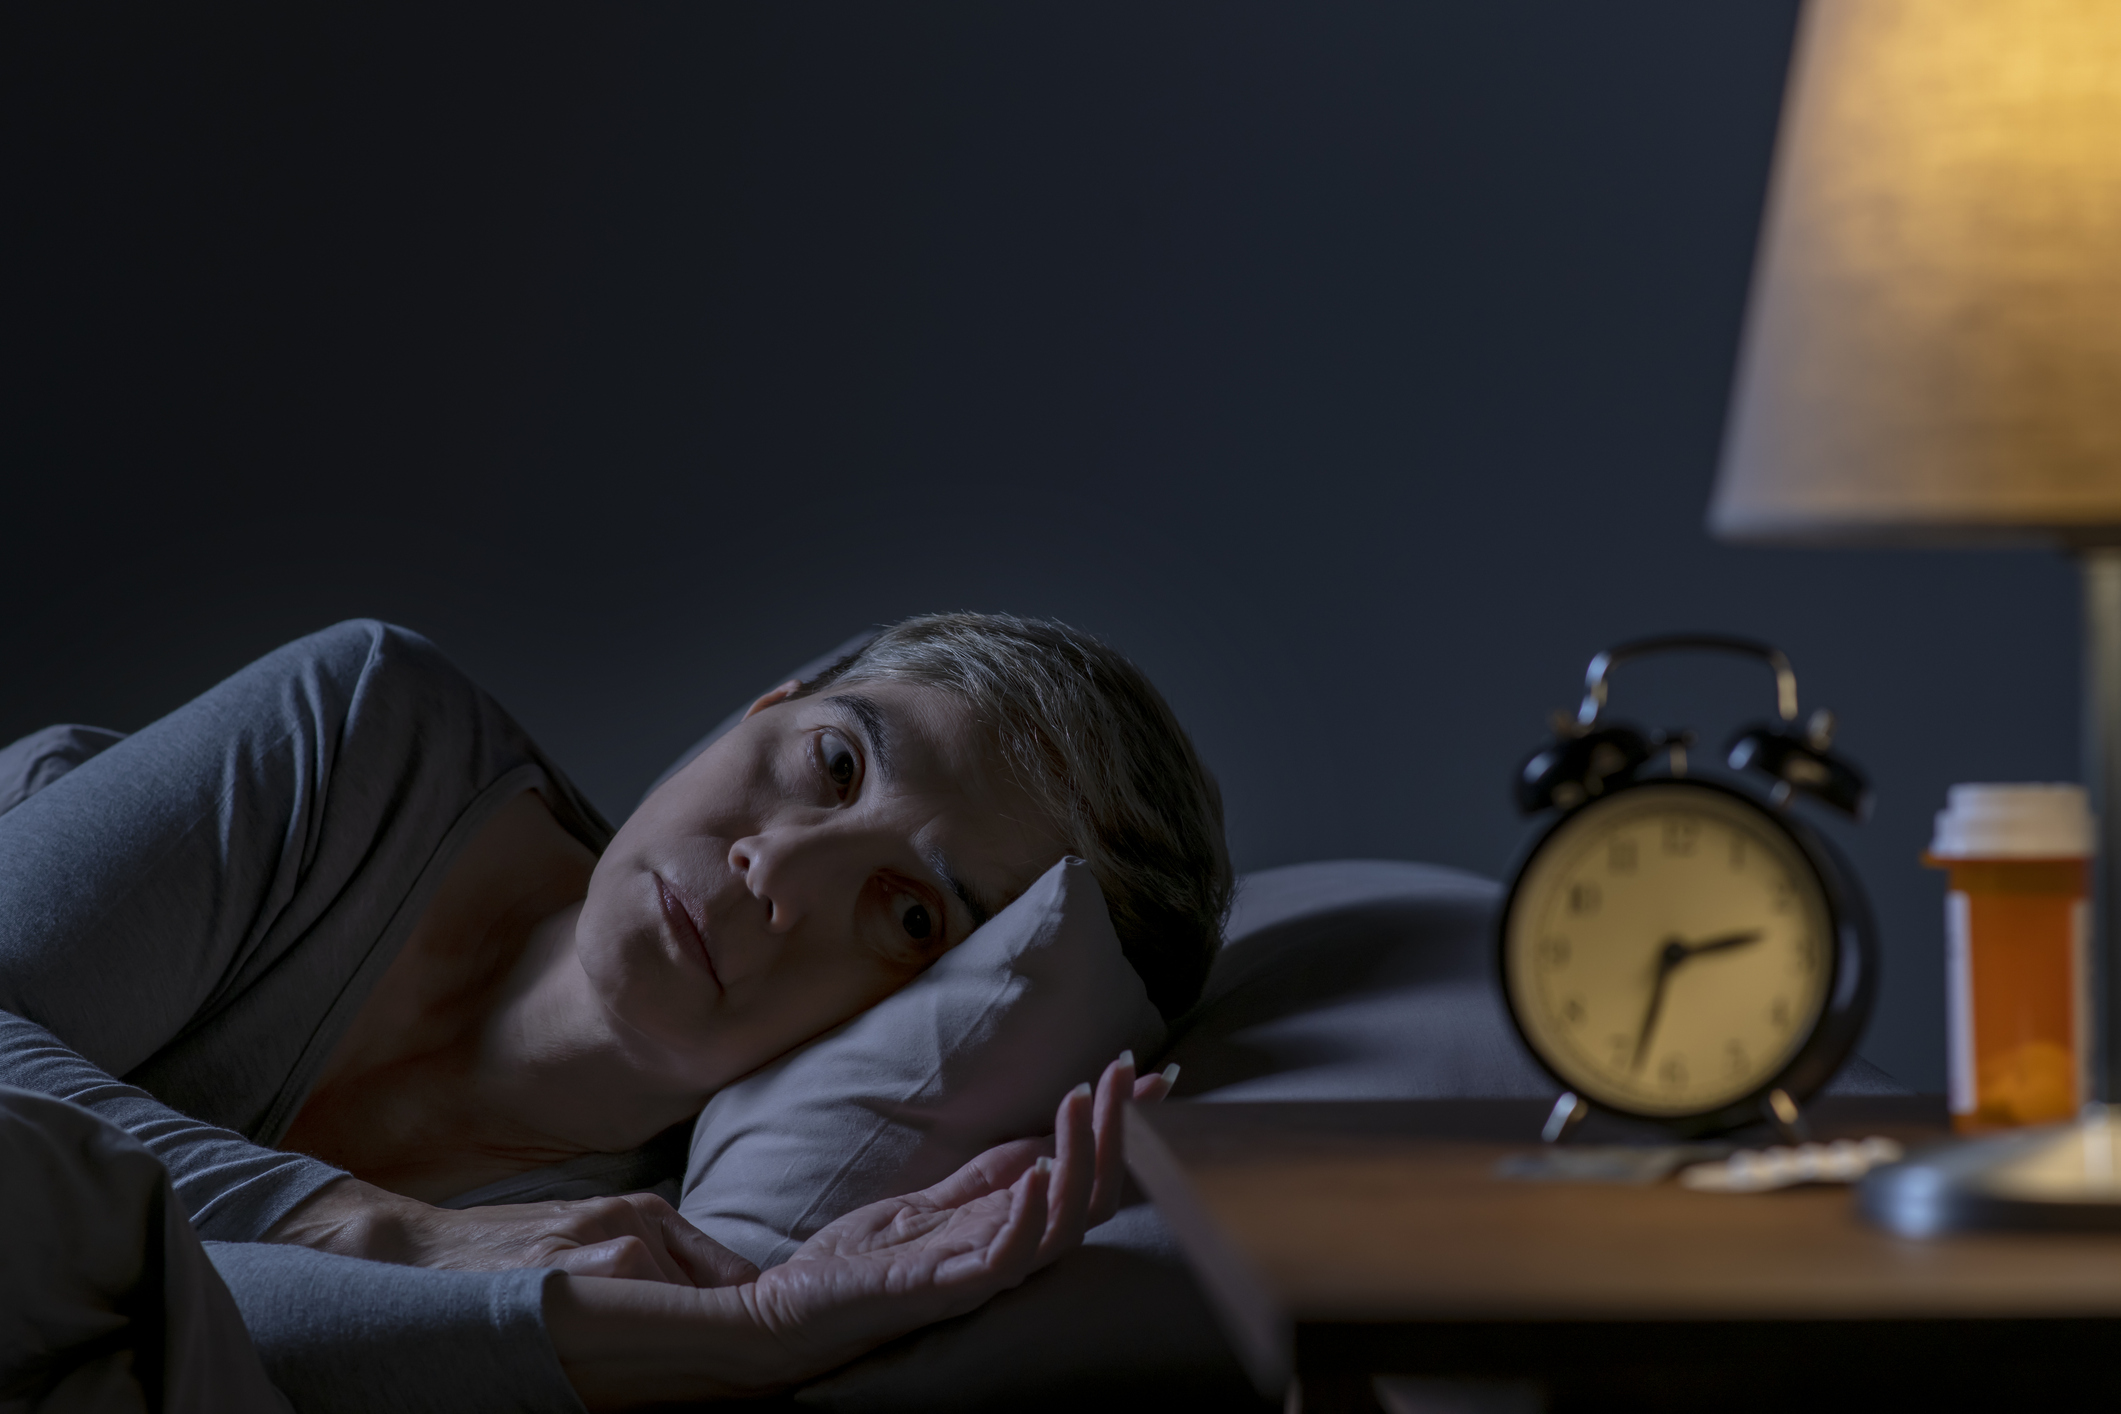 Skimping on sleep is a real nightmare for your body